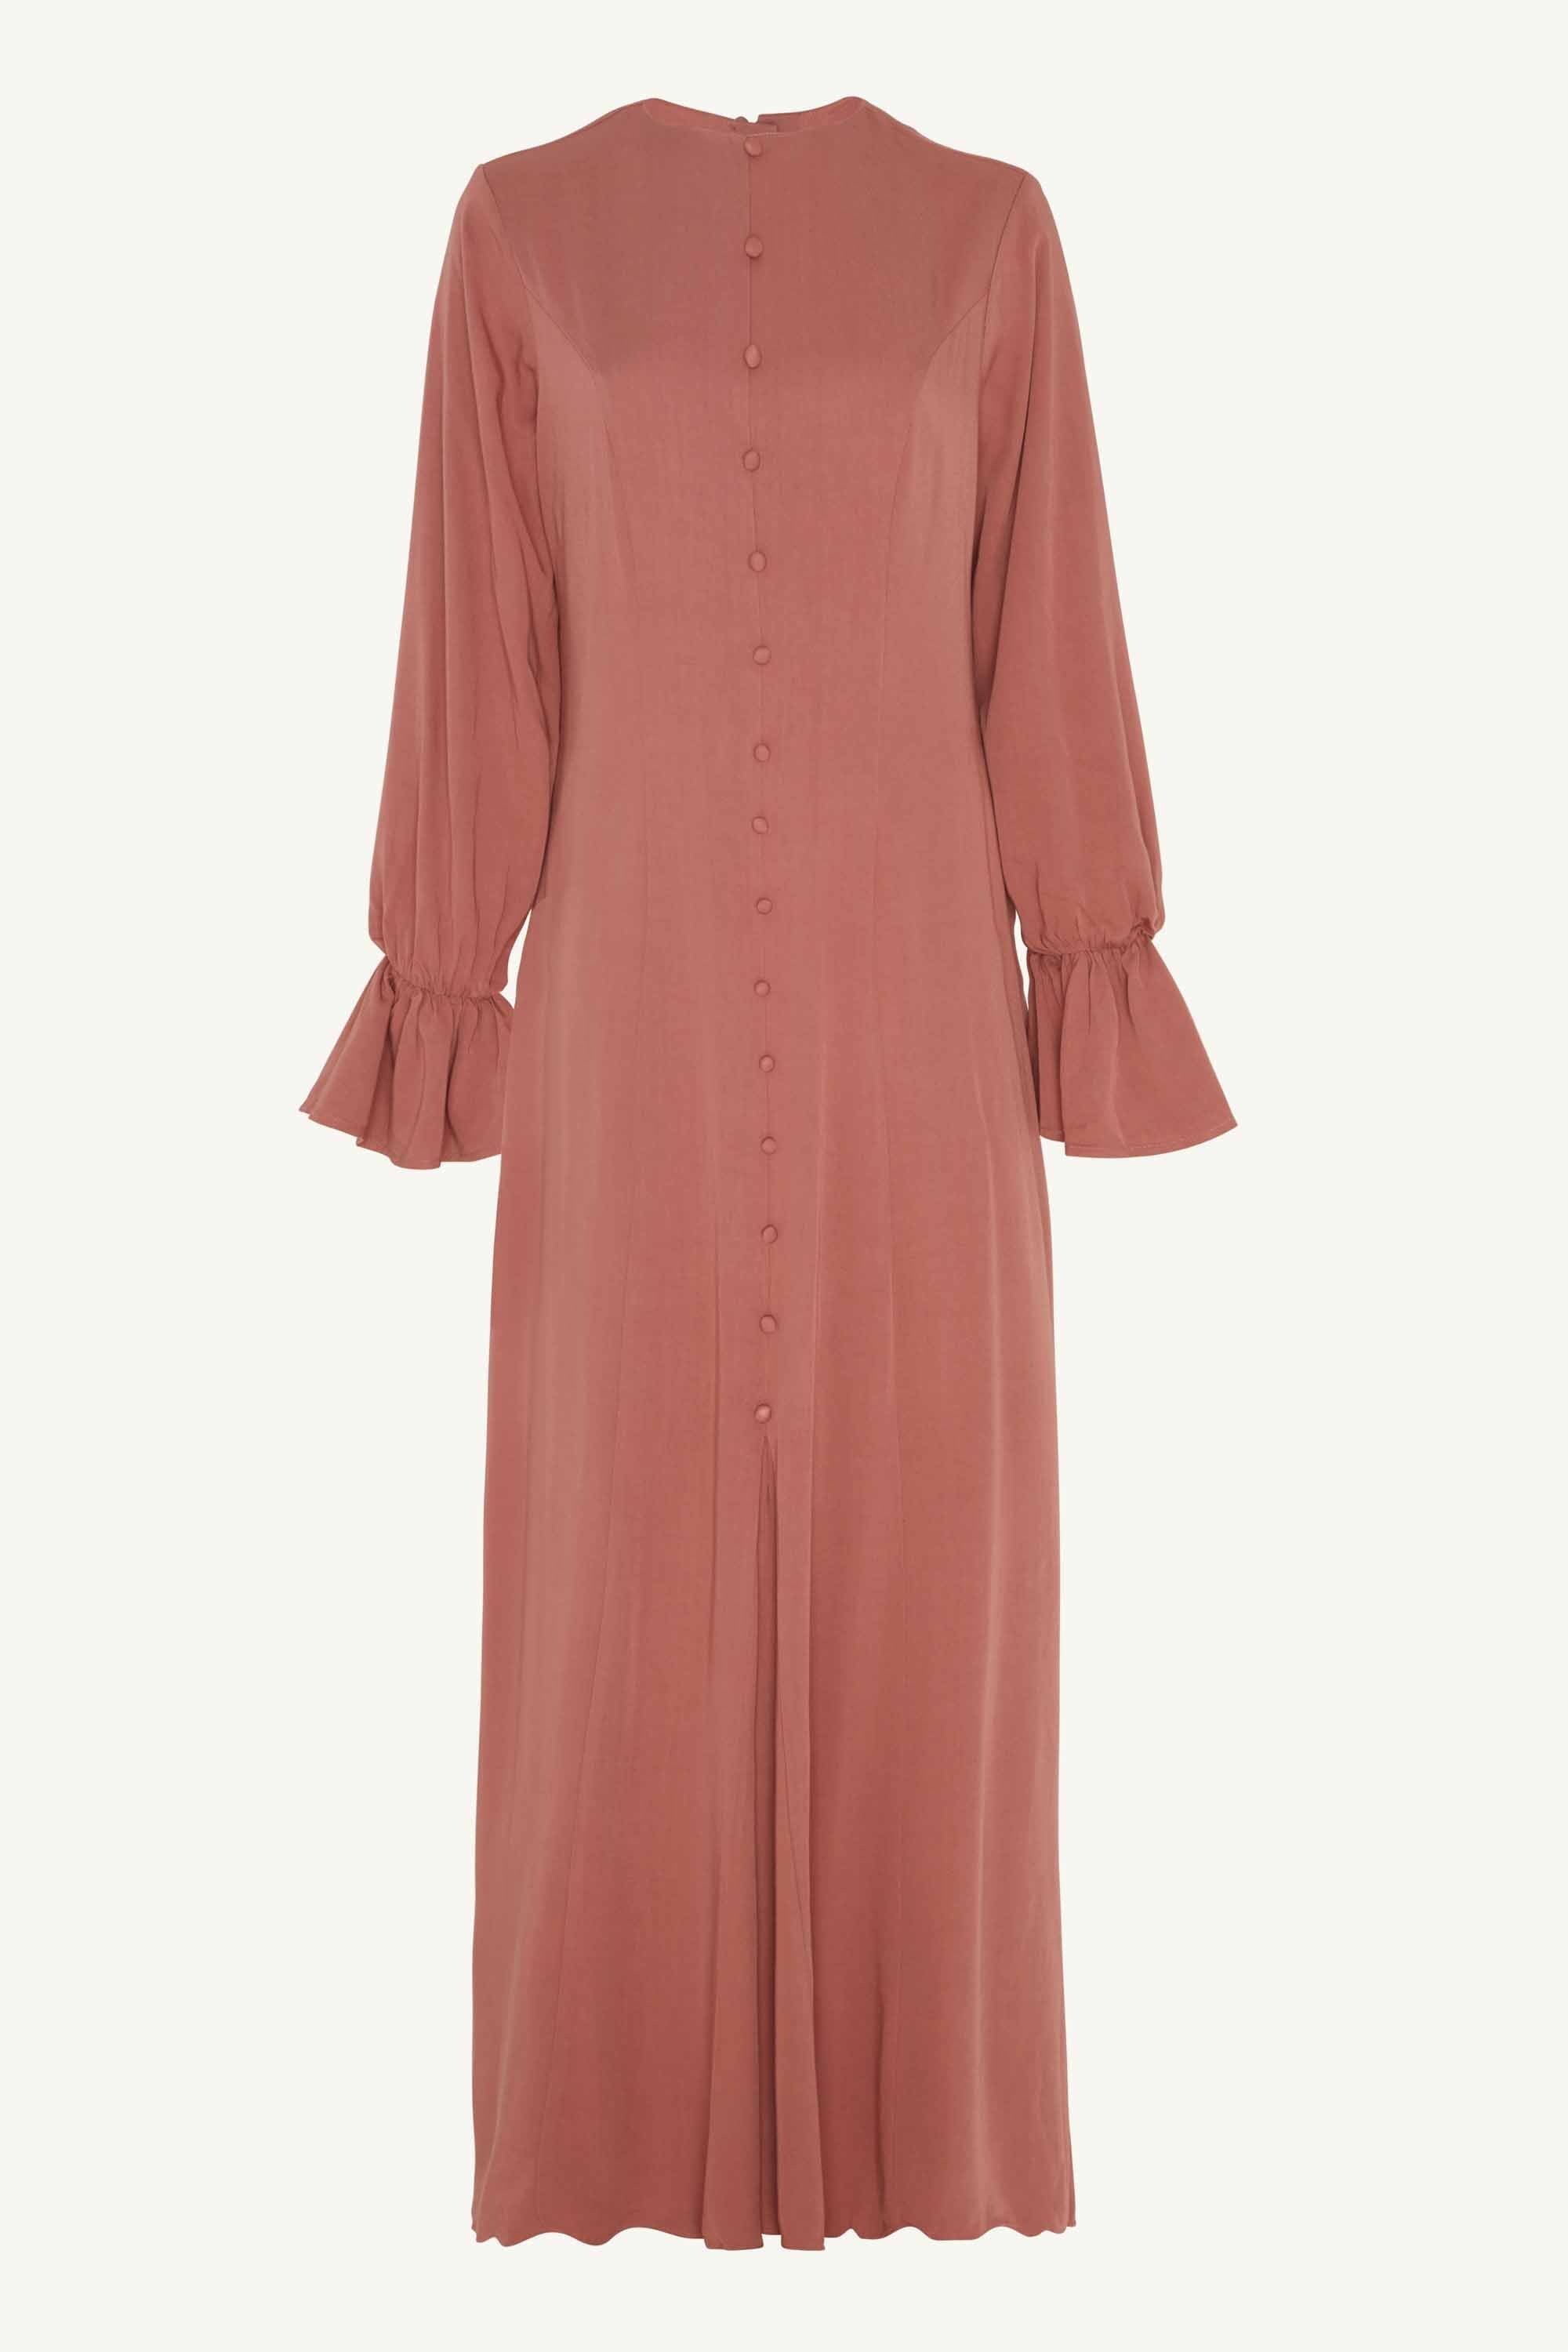 Deanna Button Front Maxi Dress - Rosewood Clothing Veiled Collection 